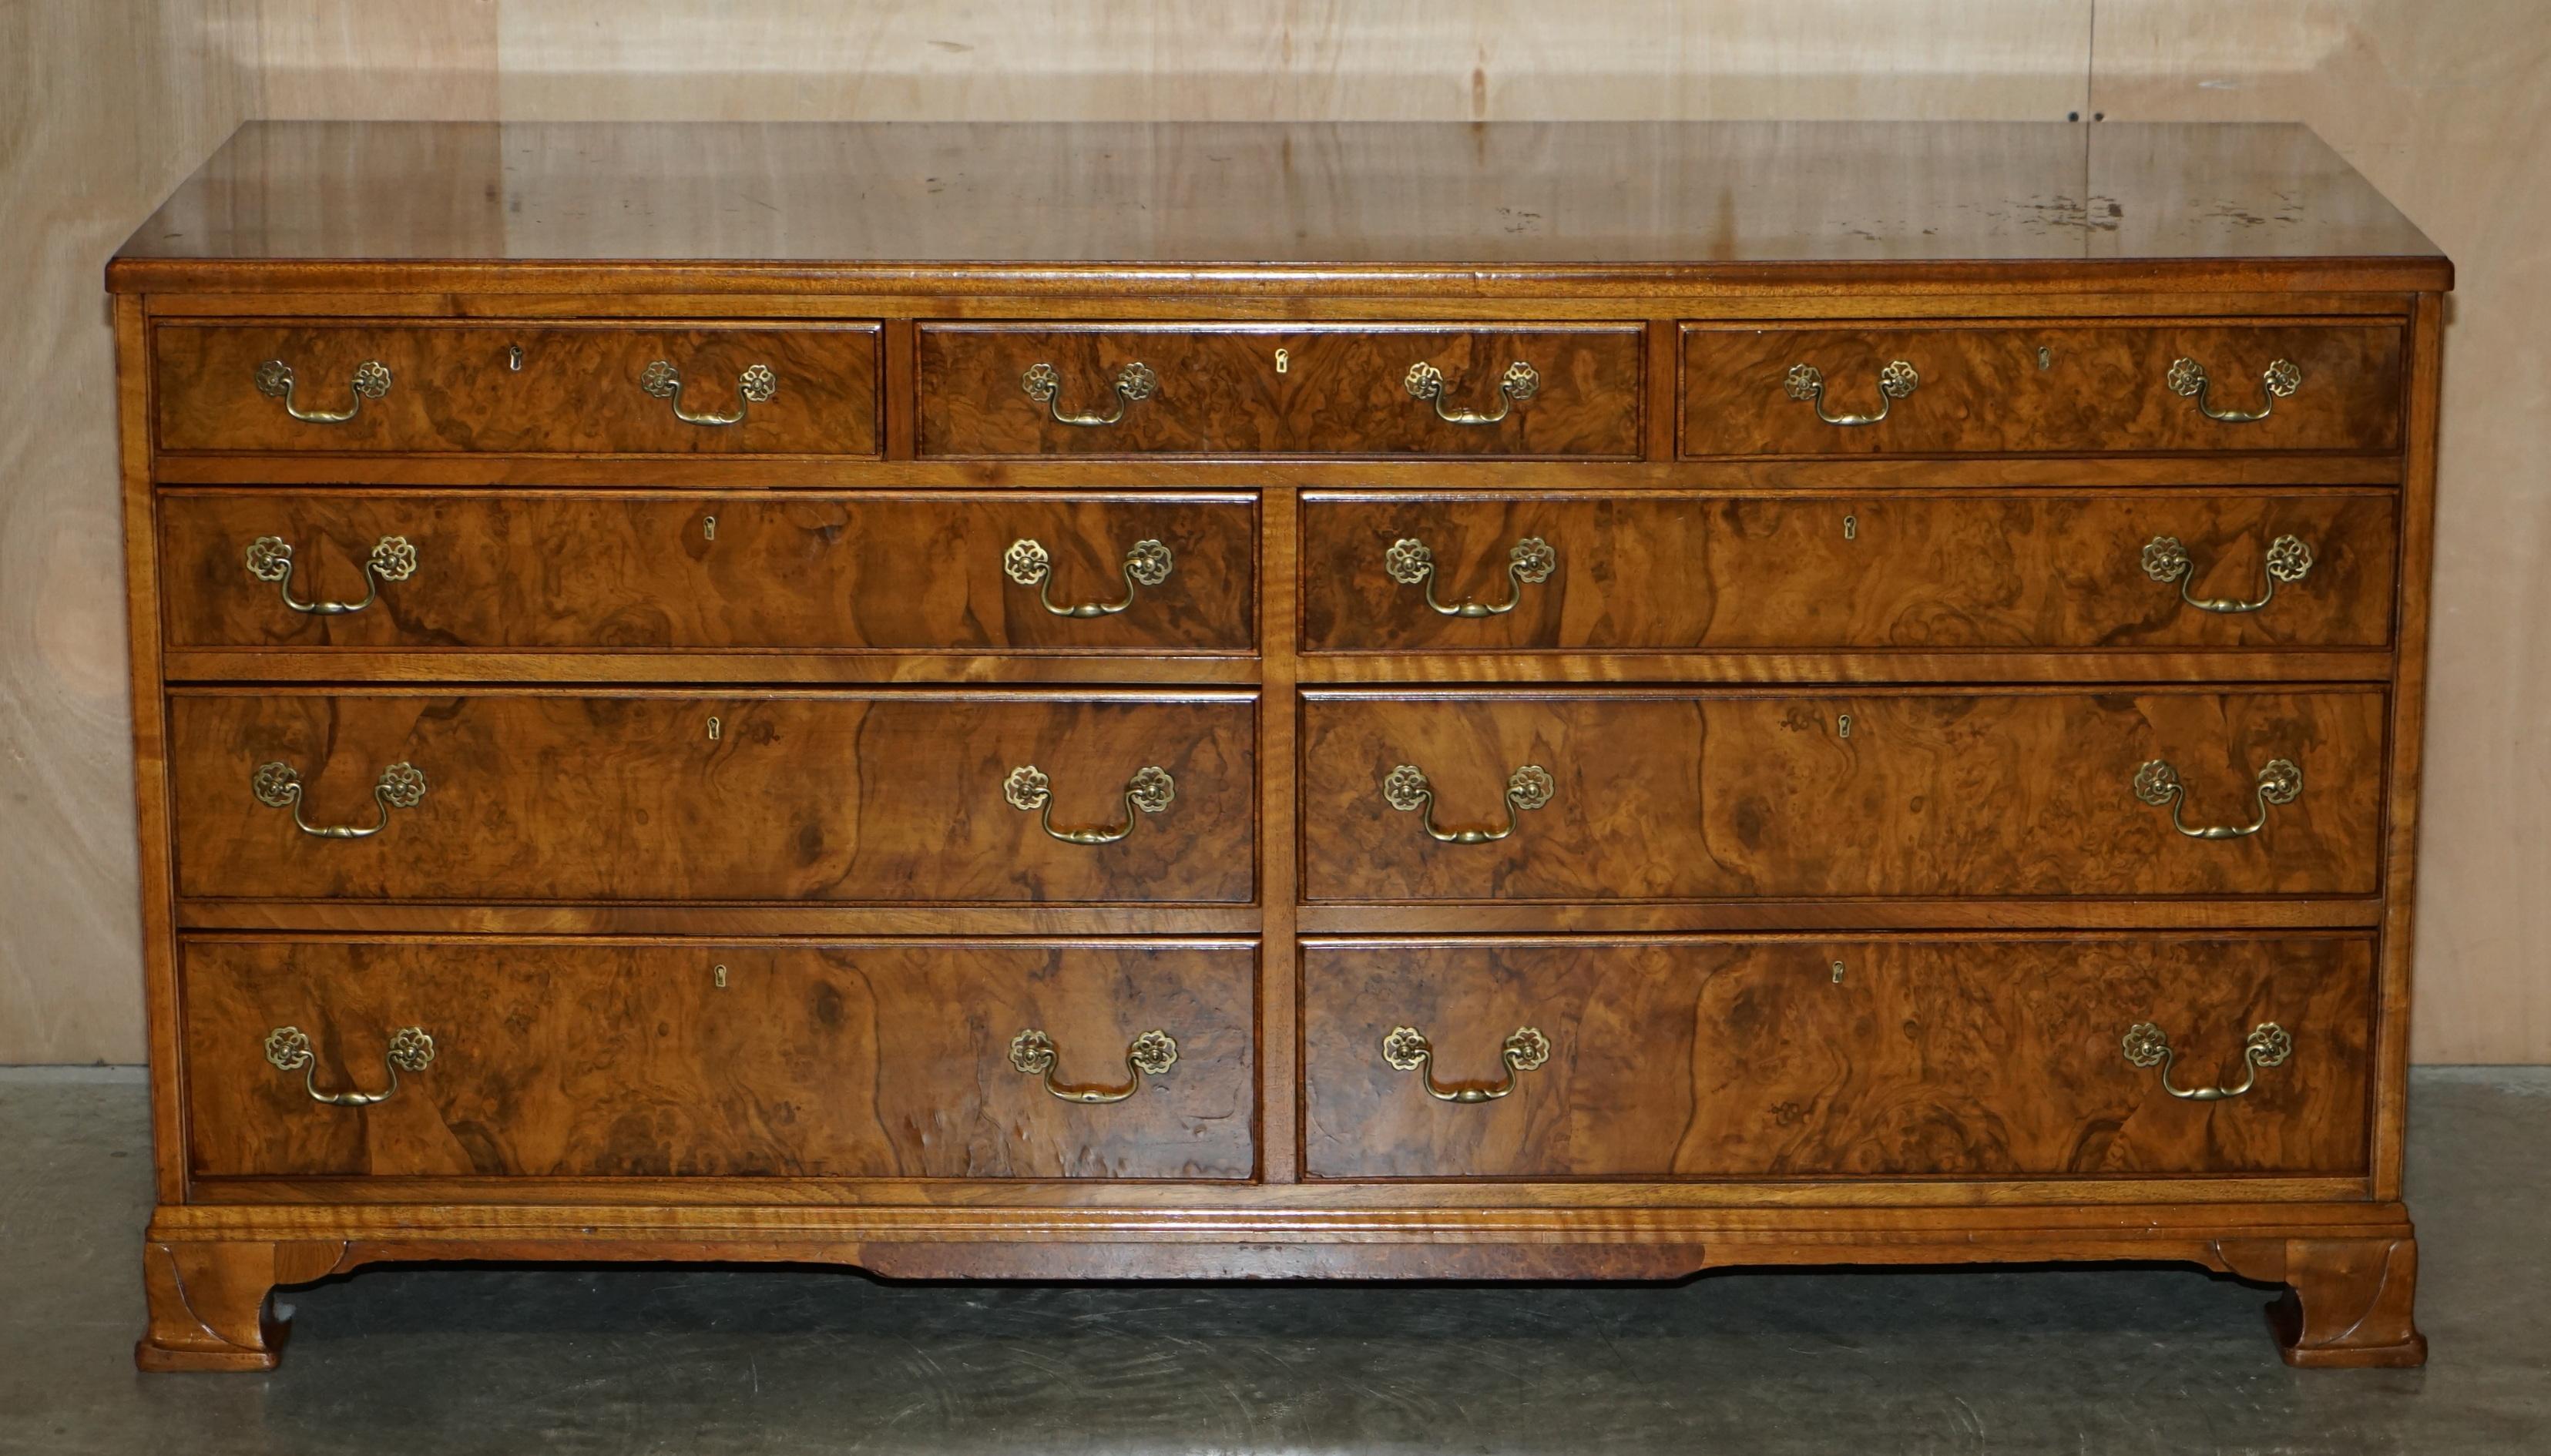 Victorian Stunning Large Sideboard Sized Bank or Chest of Drawers in Burr and Burl Walnut